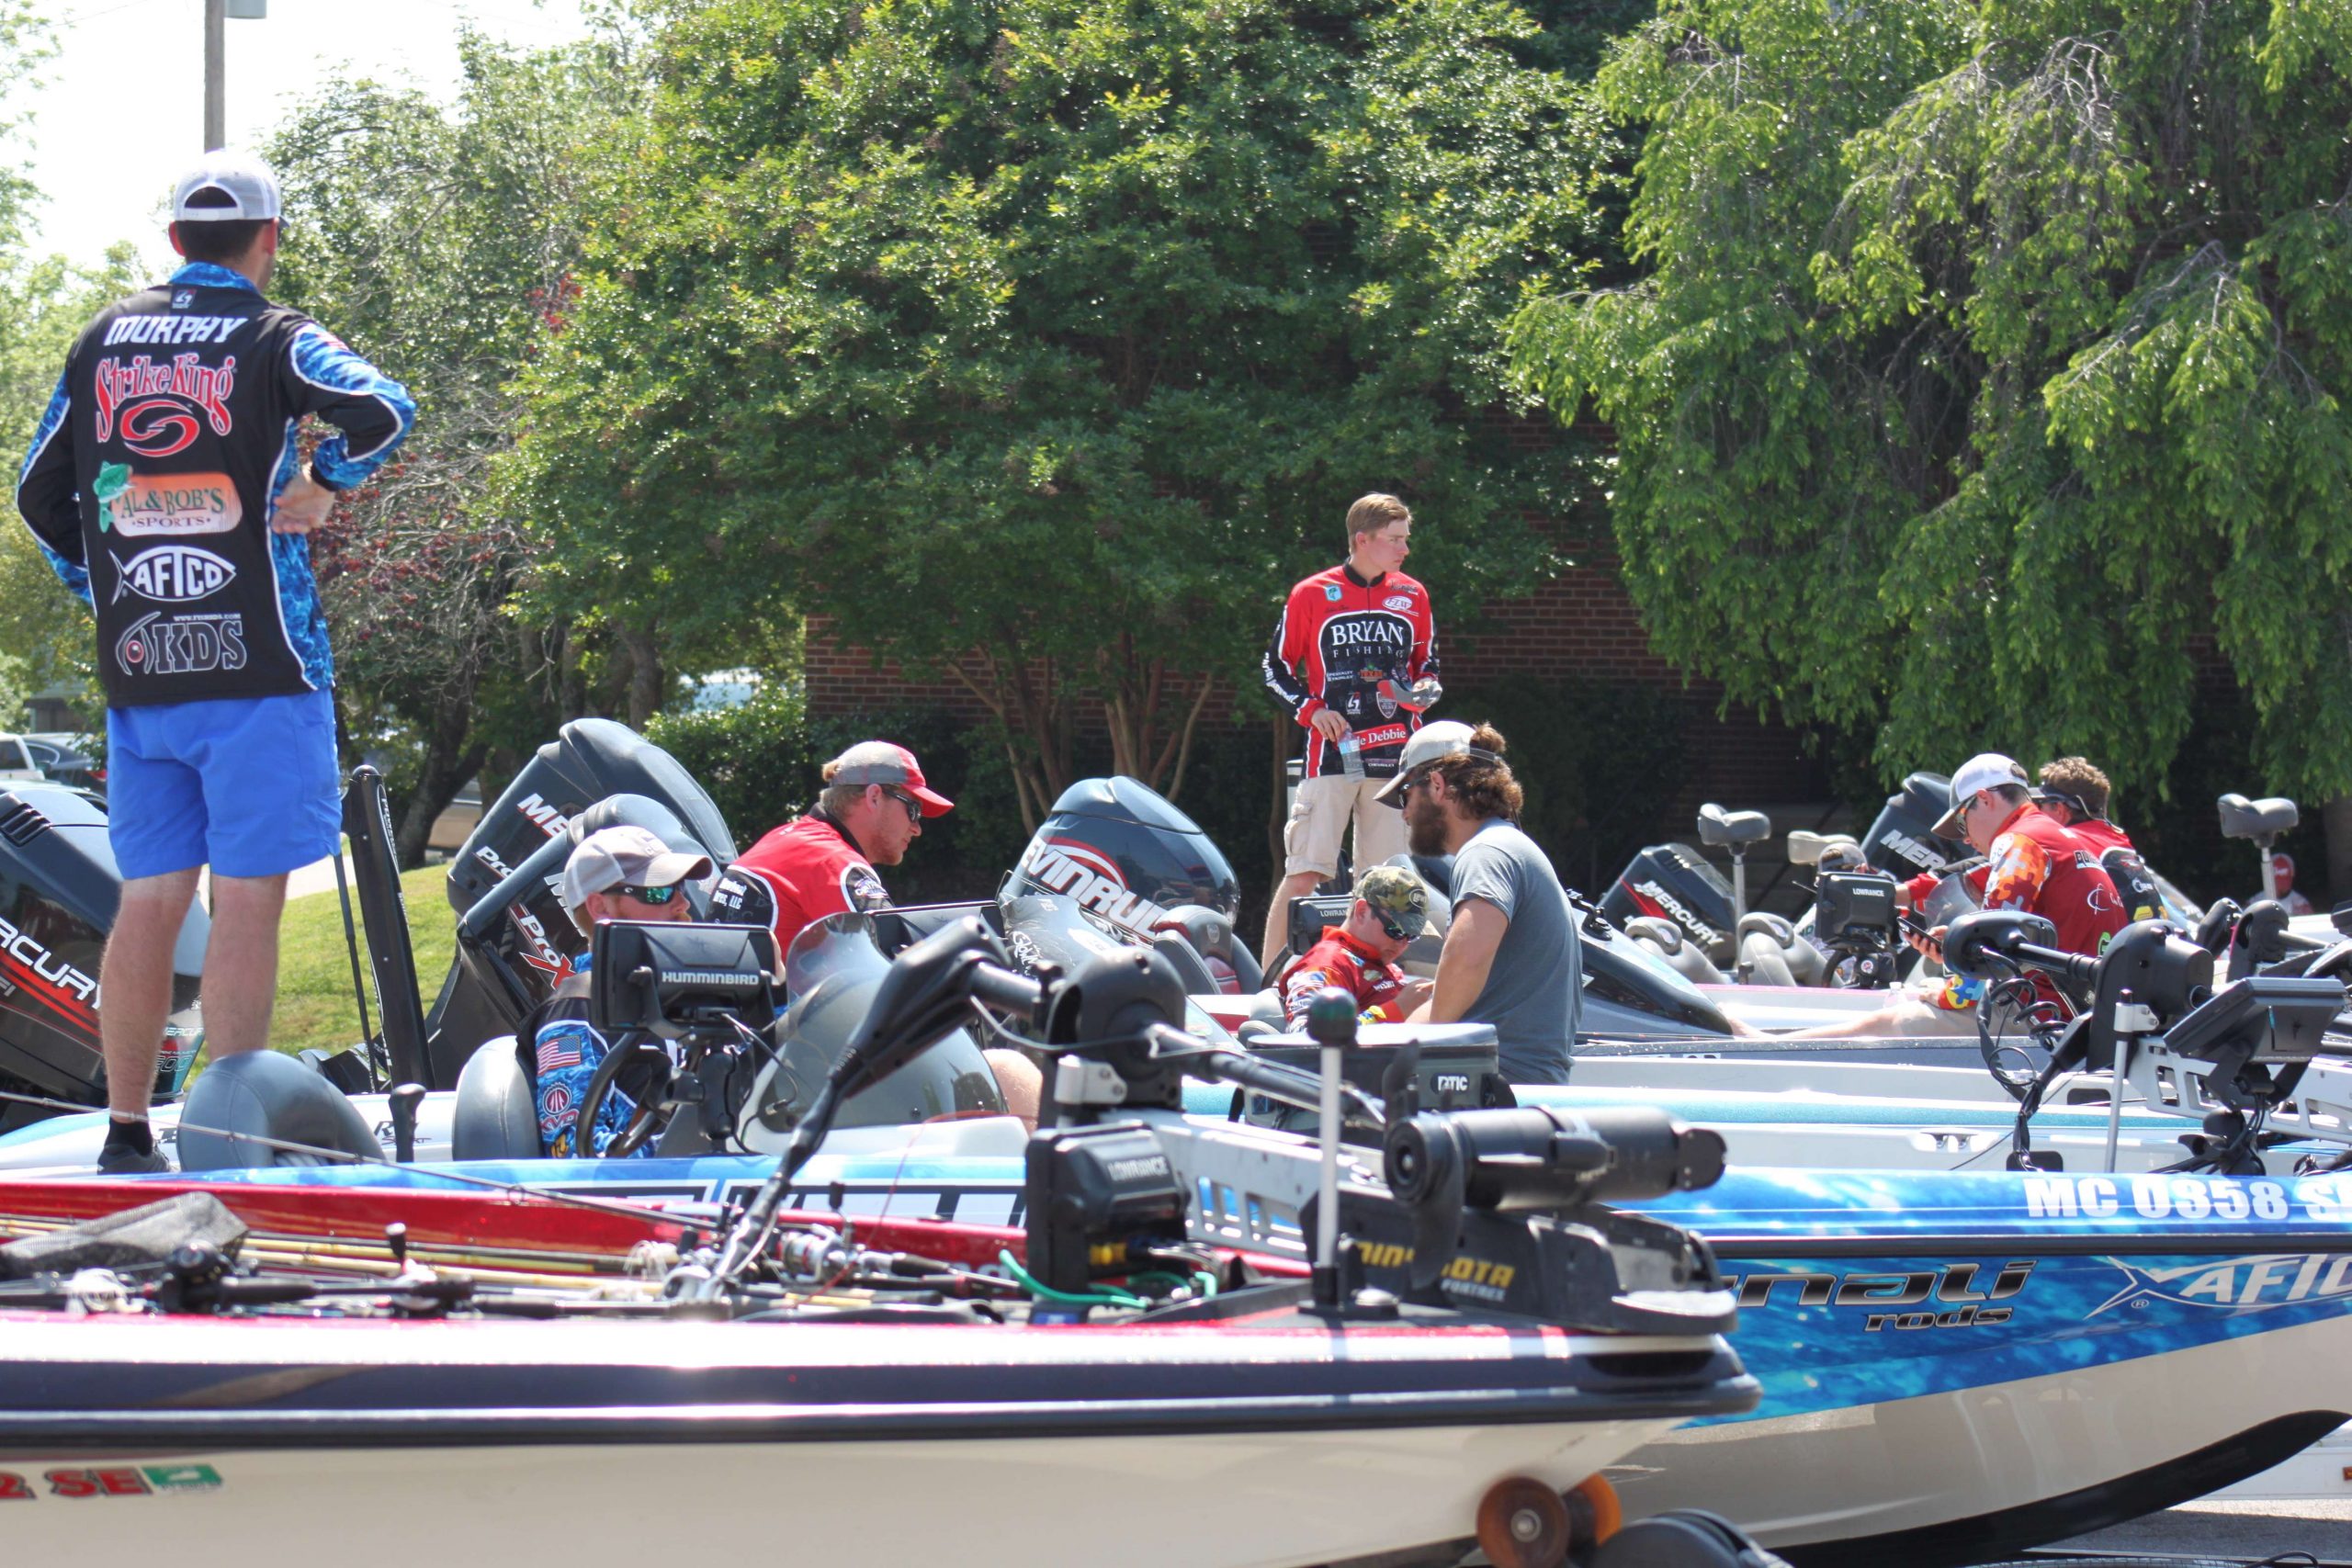 The anglers begin to line up in a parking lot near the weigh-in stage.